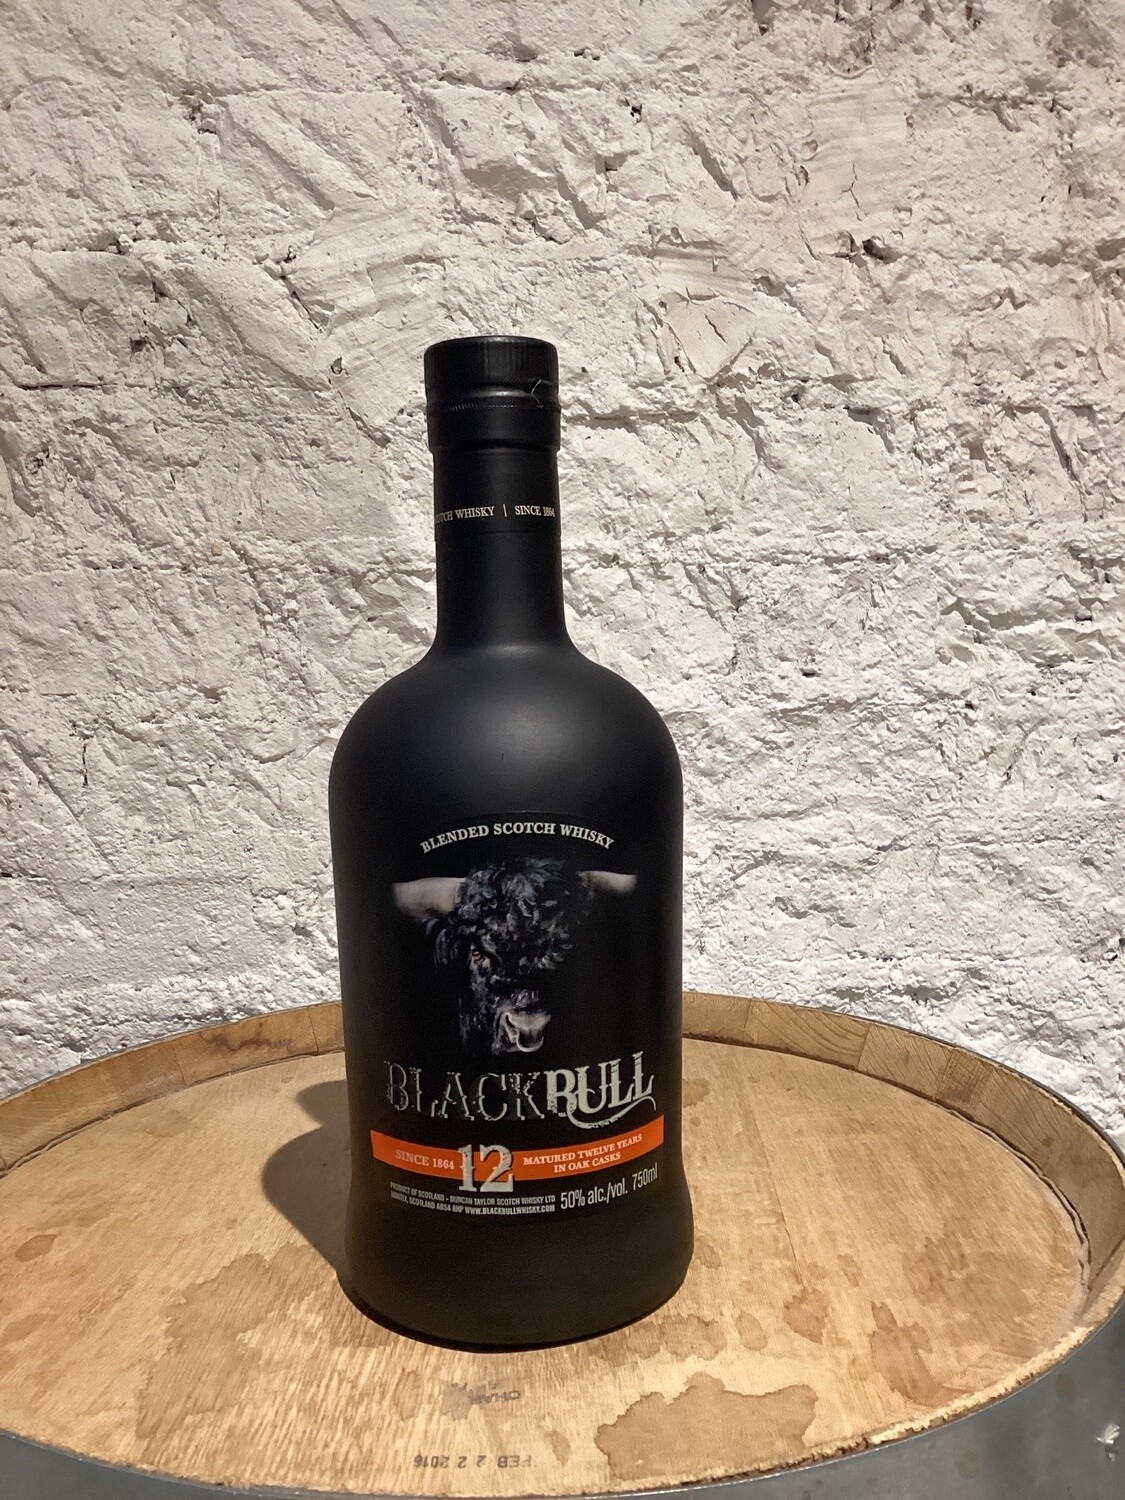 Duncan Taylor "Black Bull" 12 Year Old Blended Scotch Whisky Scotland (750ml), Size: 750ml